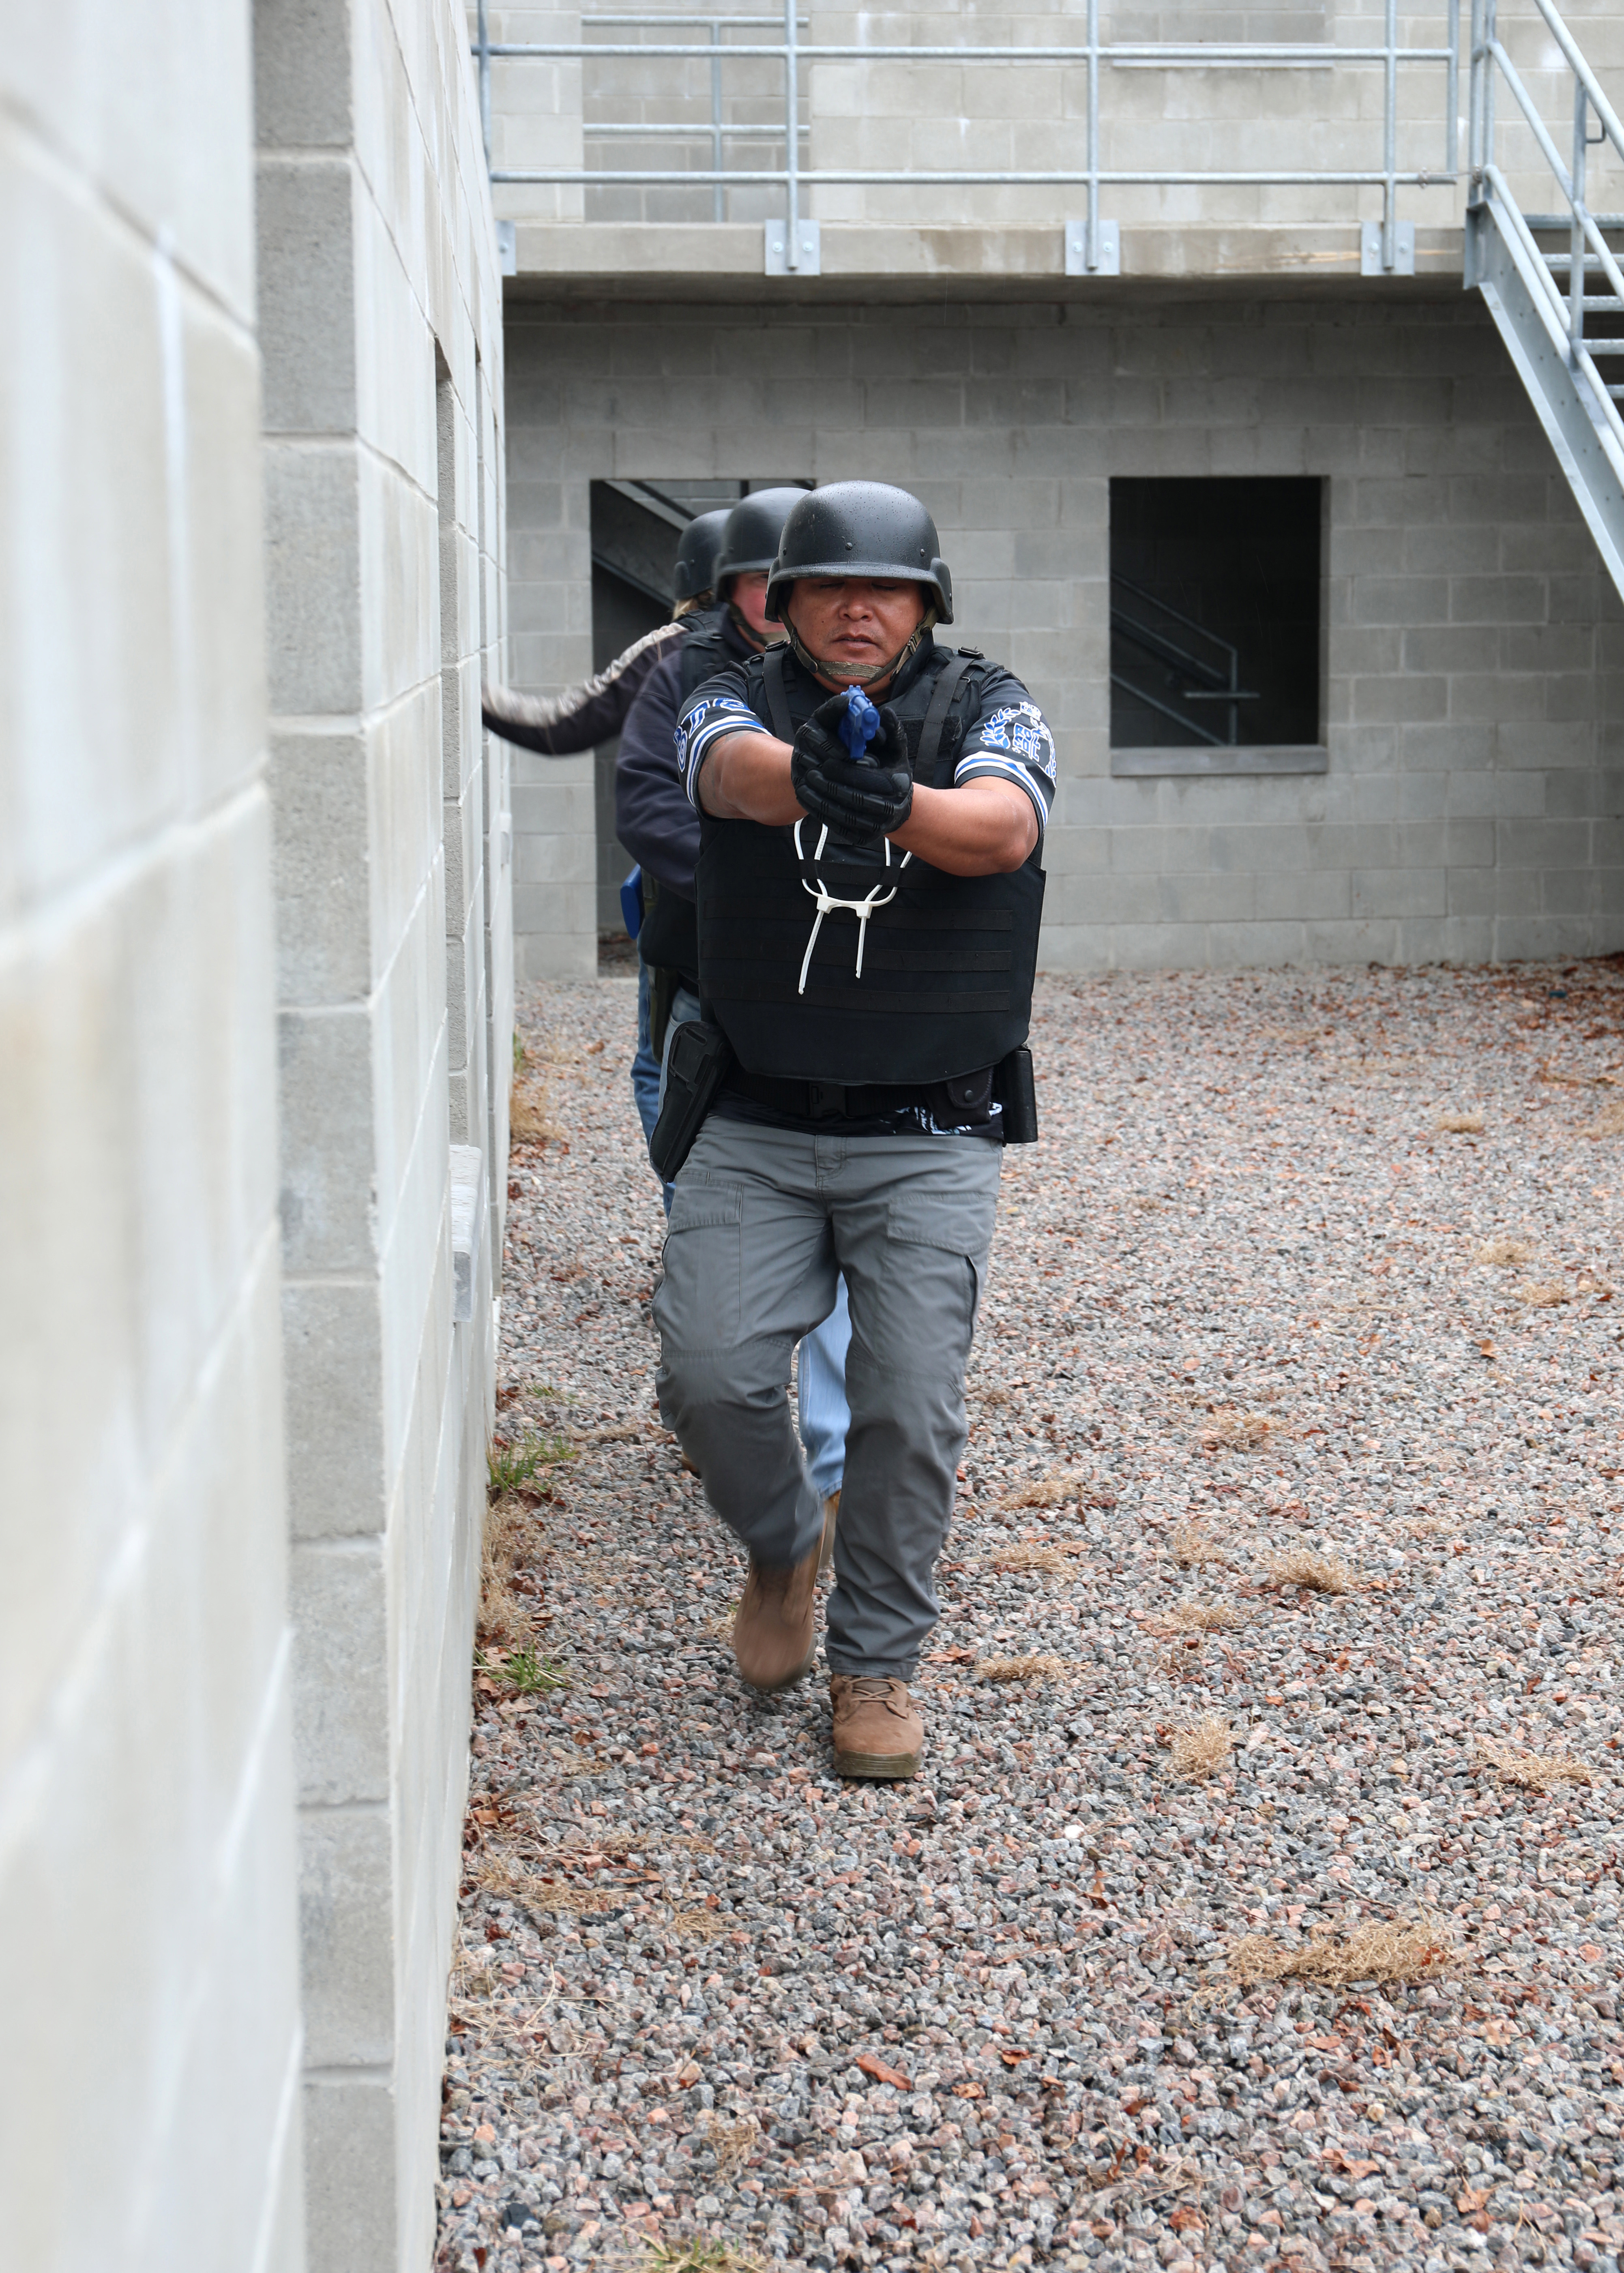 Civil Service Mariners practice clearing spaces of simulated security threats at the Military Sealift Command Training Center East on Joint Base Langley-Fort Eustis, Virginia, Feb. 24.